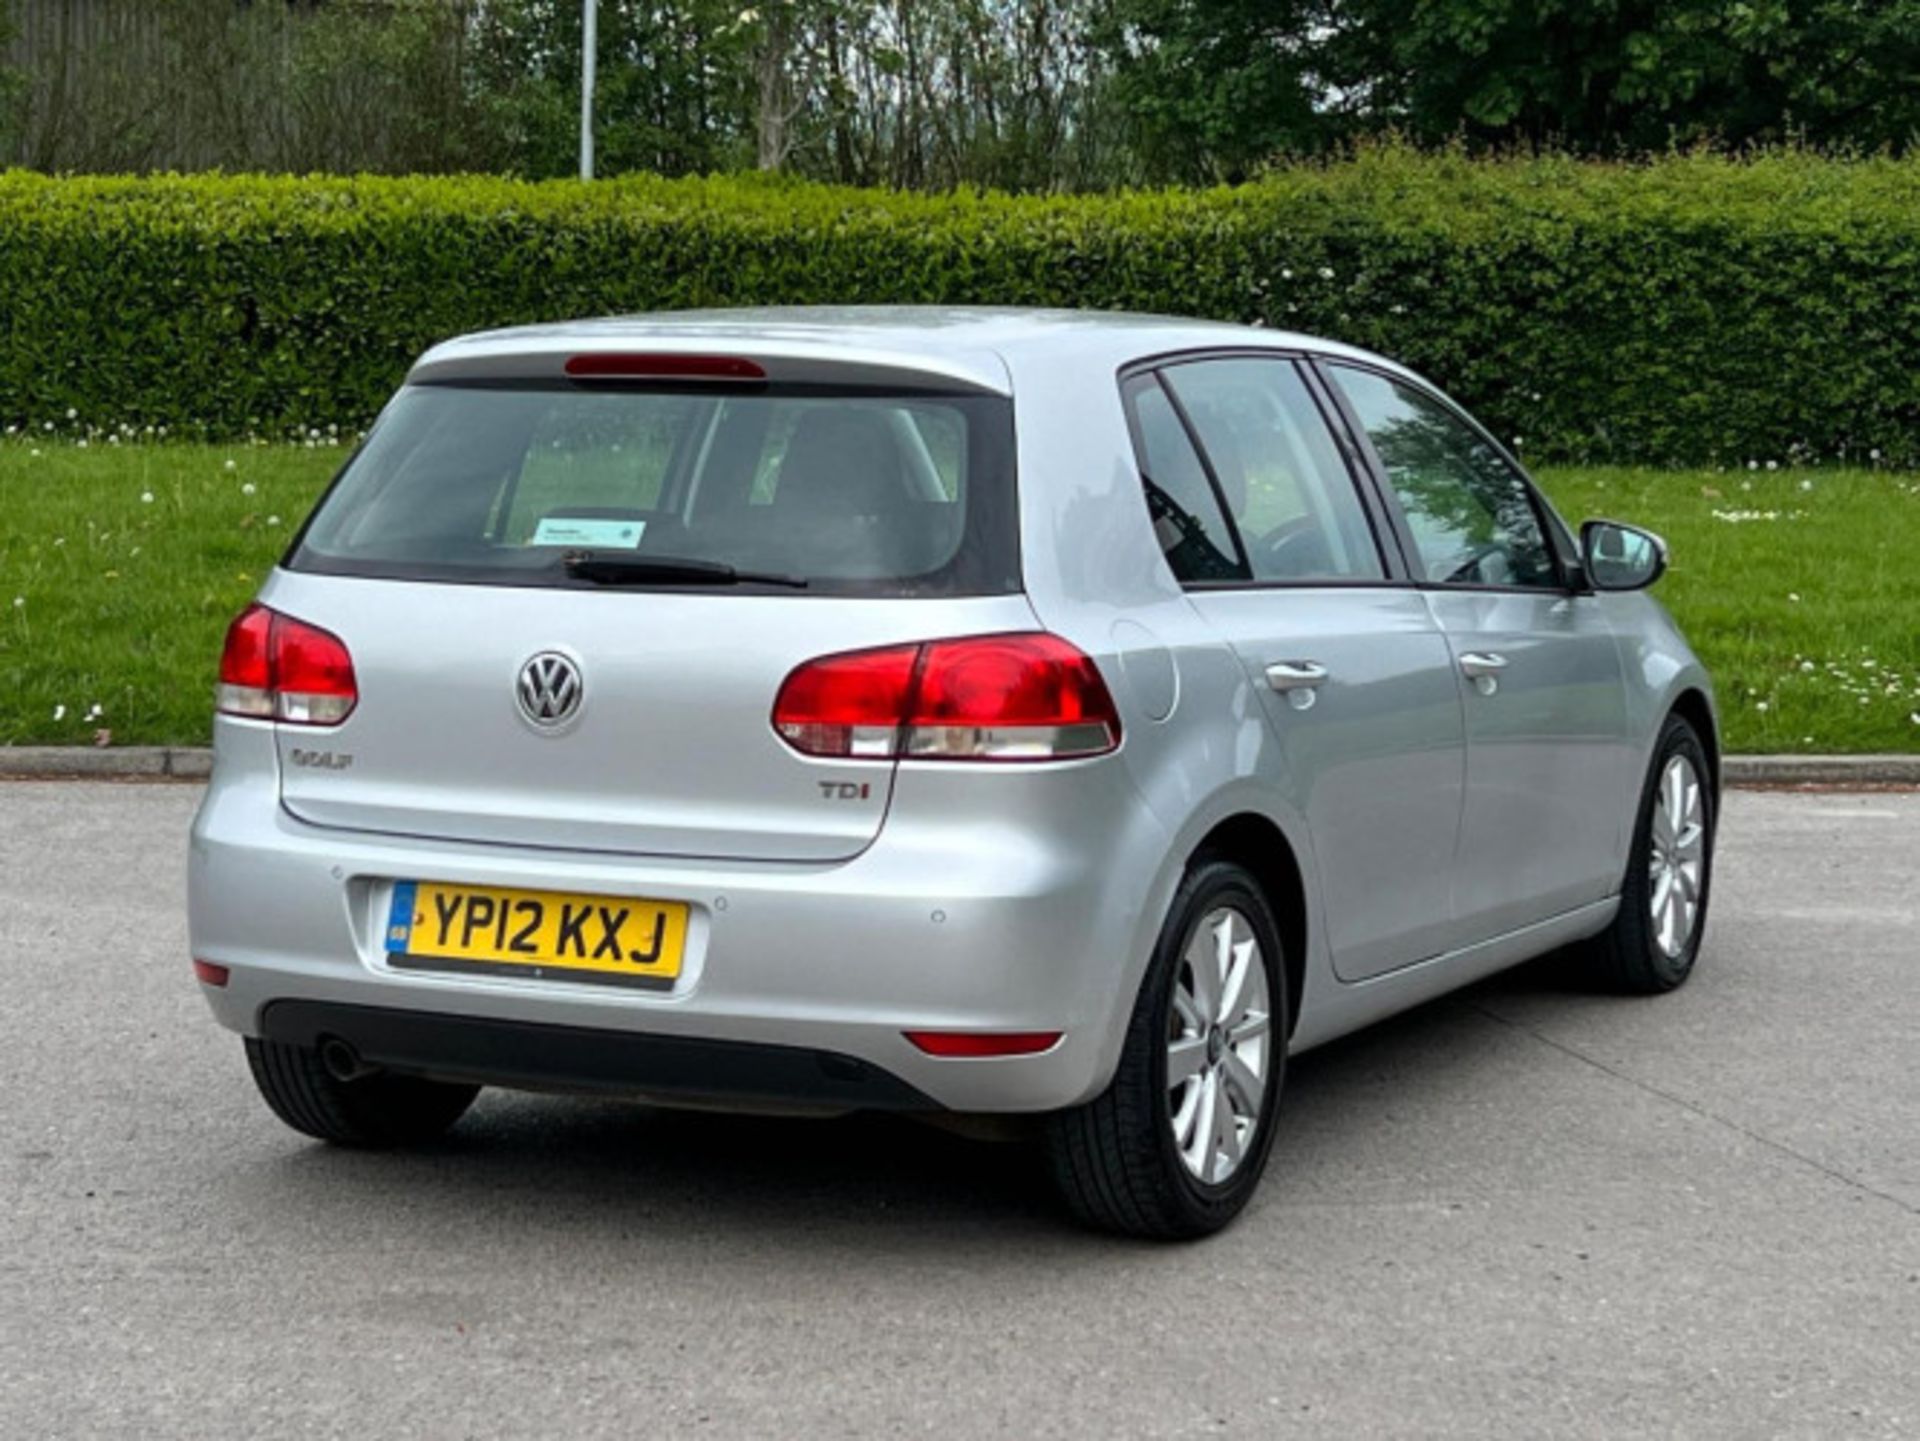 IMPECCABLE 2012 VOLKSWAGEN GOLF 1.6 TDI MATCH >>--NO VAT ON HAMMER--<< - Image 11 of 116